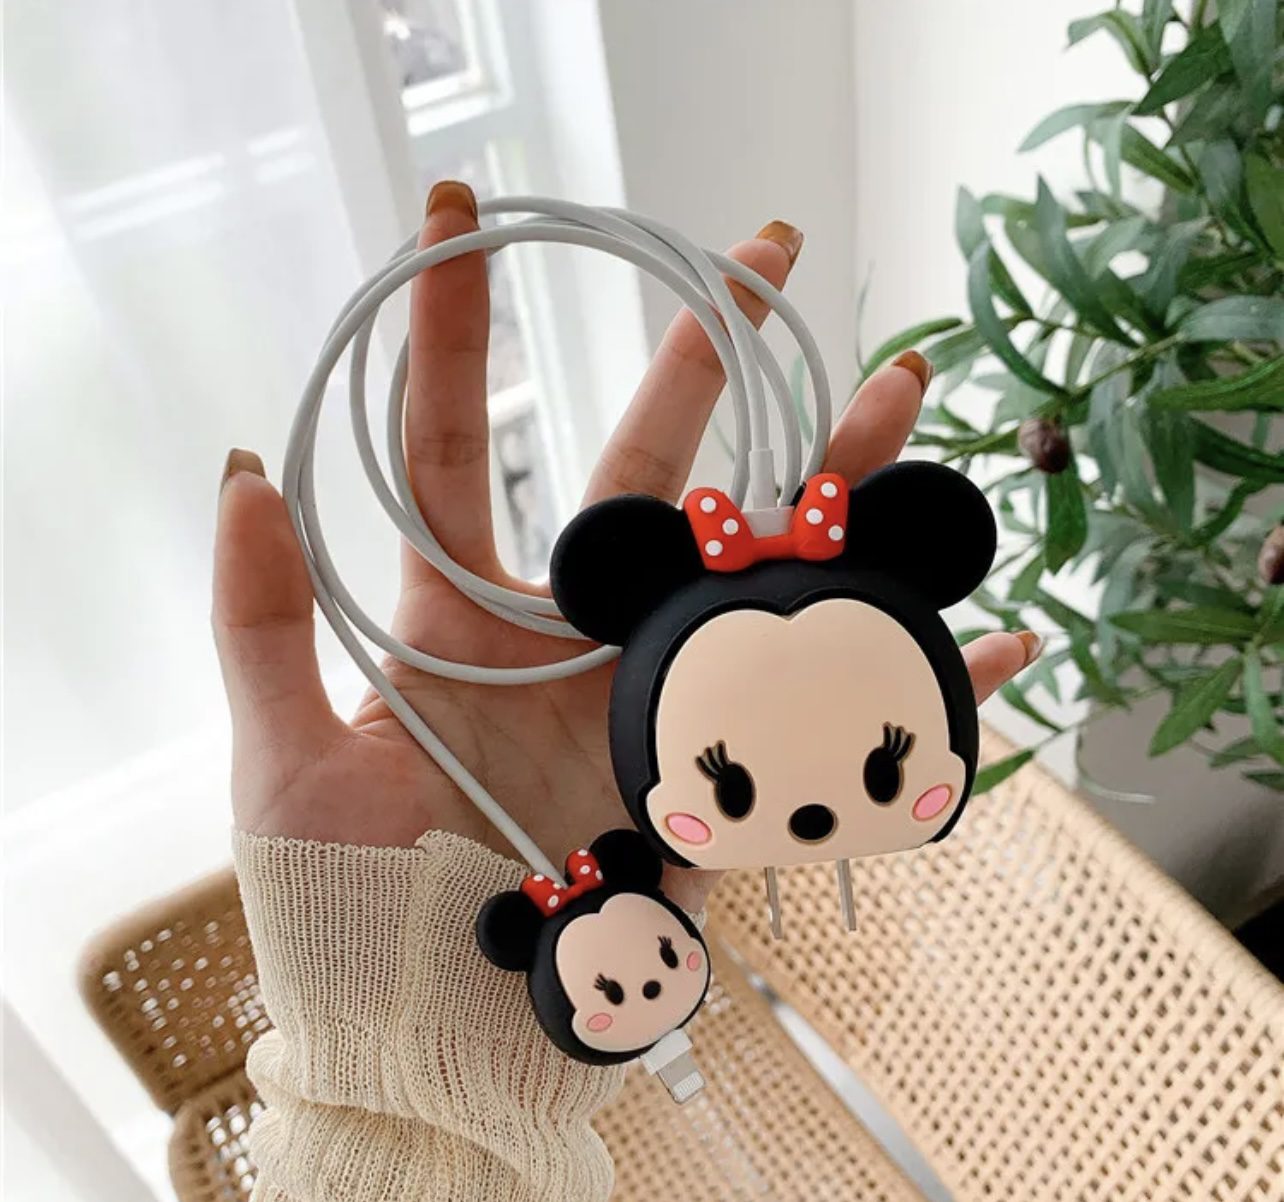 https://thegadgetoutfit.com/wp-content/uploads/2023/03/Iphone-Charger-case-Cover-Minnie-Mouse-10.jpg